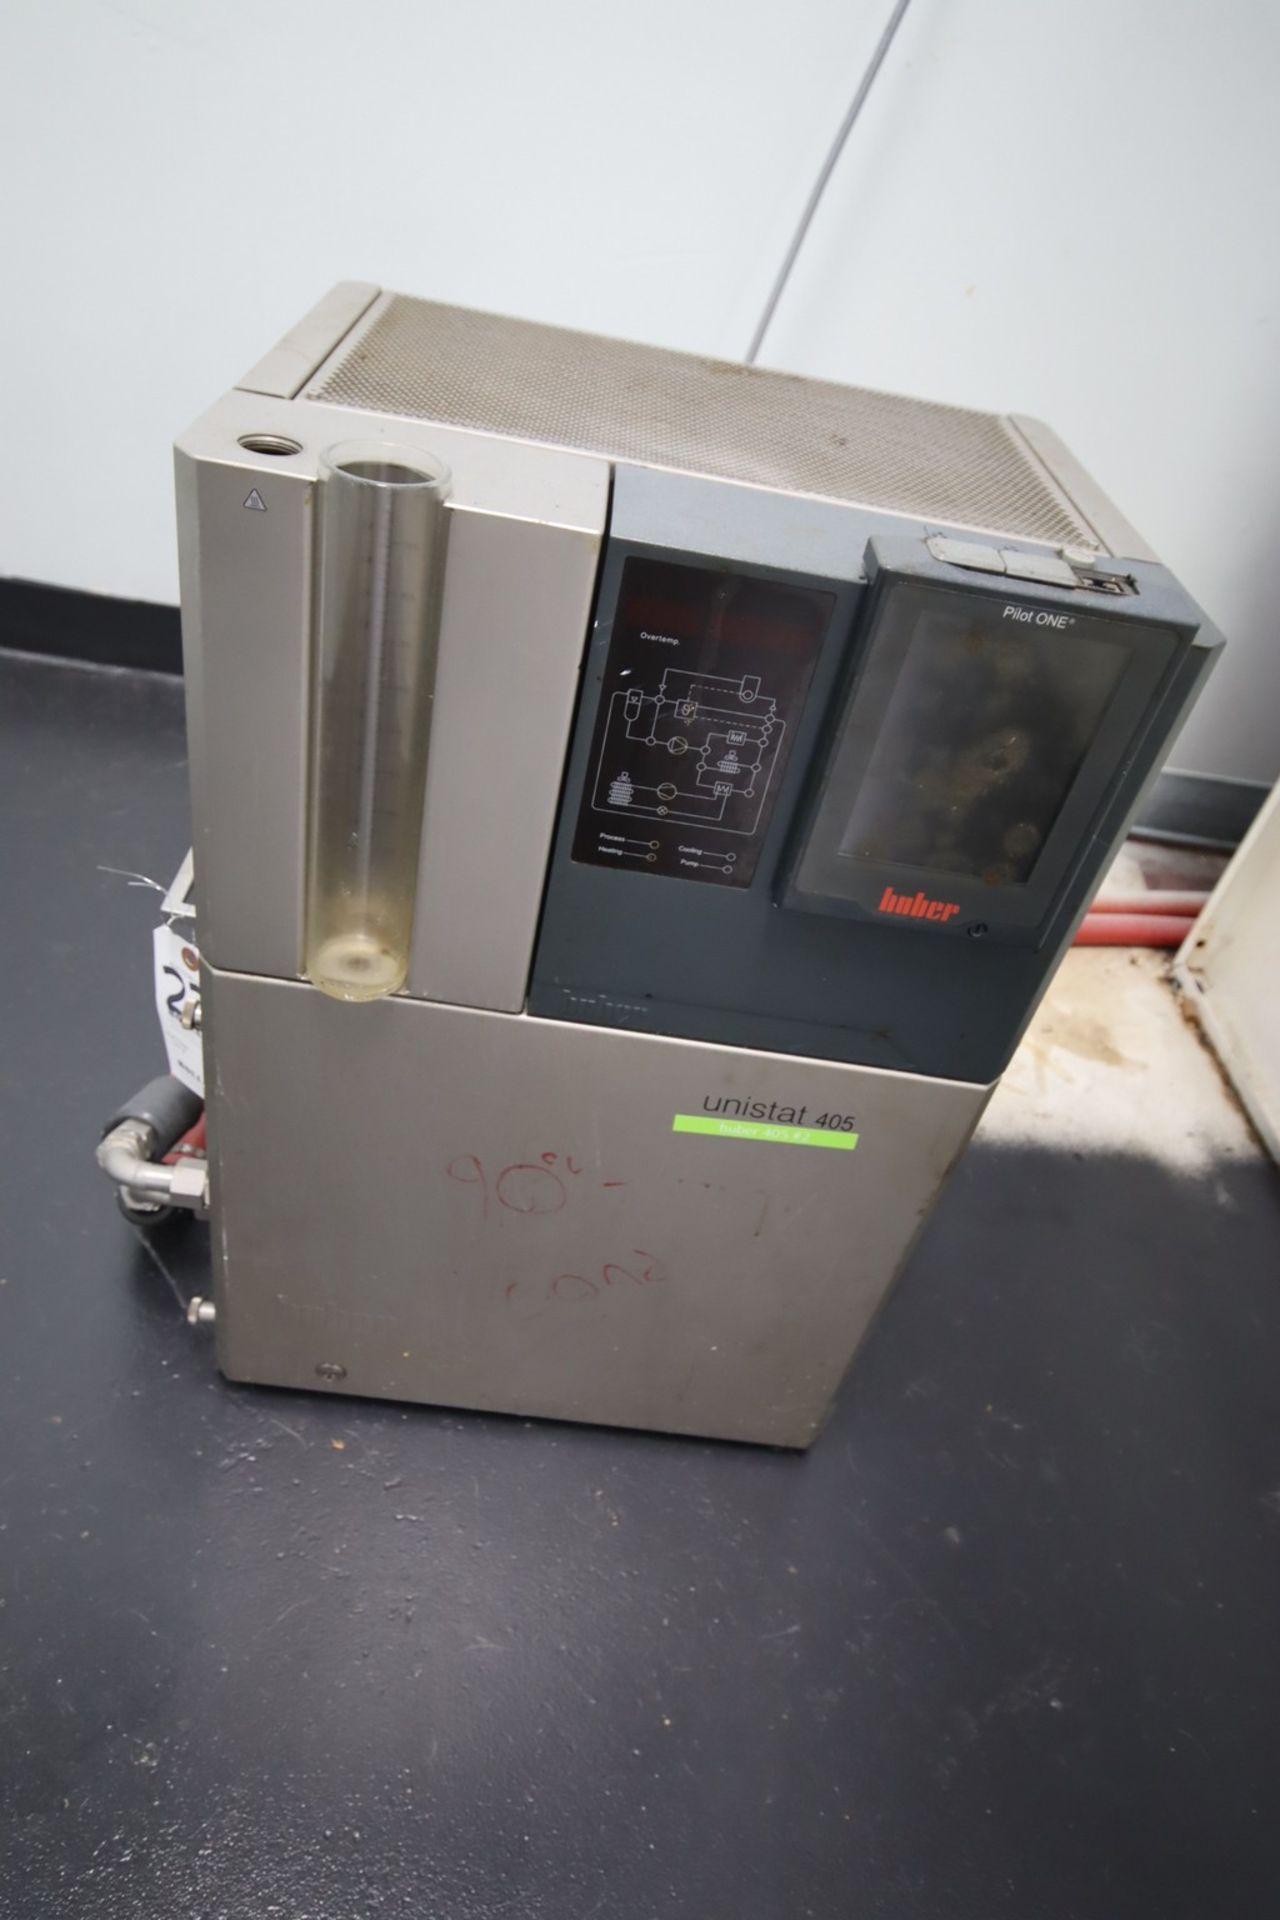 2019 Huber Unistat 405 with Pilot One Refrigerated Heating Circulator